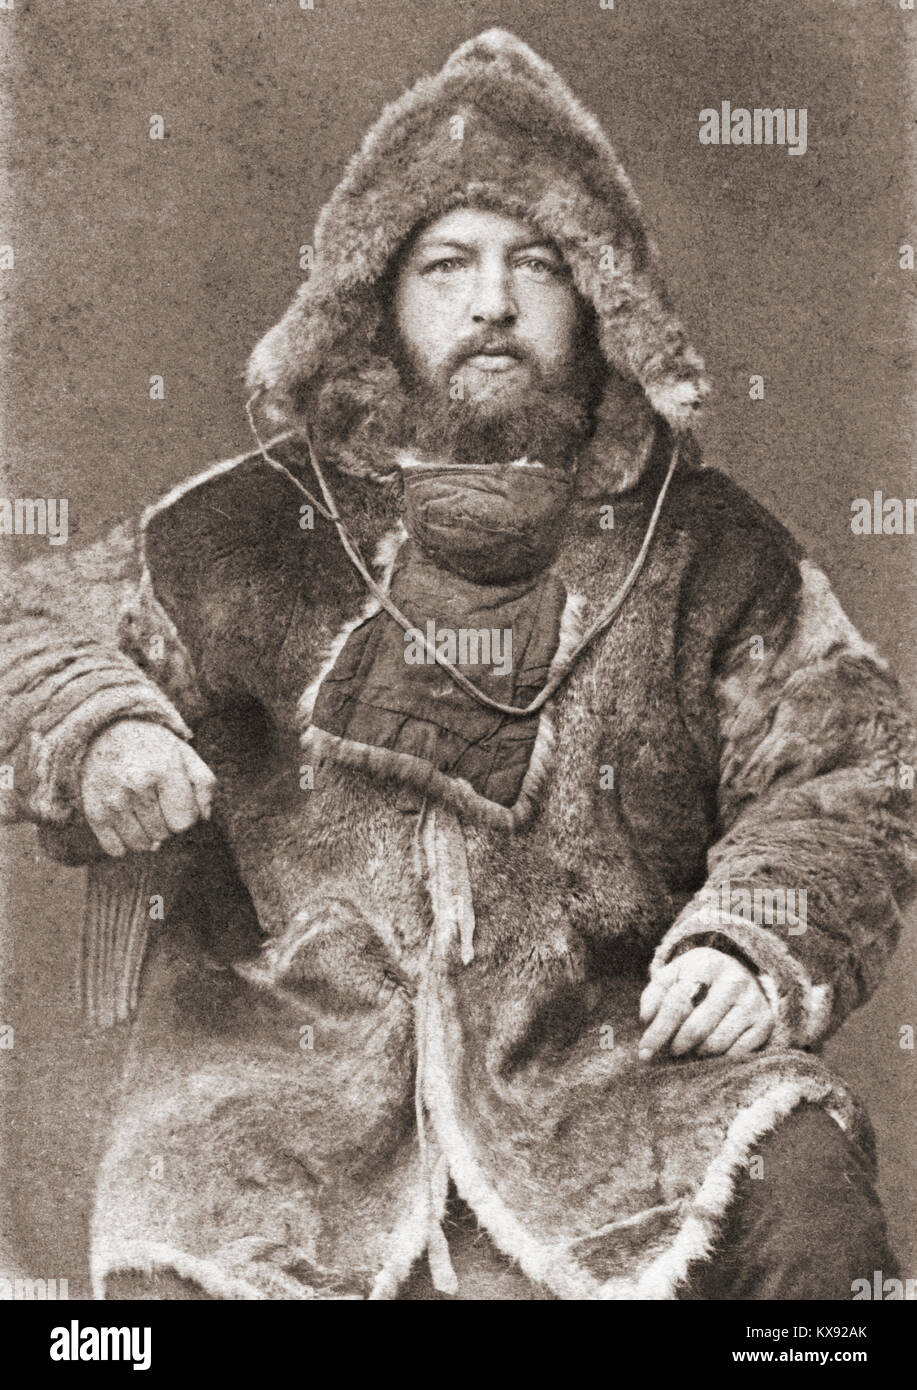 Alexander von Bunge, 1851-1930.  Baltic-German physician, zoologist and Arctic explorer.  After a 19th century photograph. Stock Photo